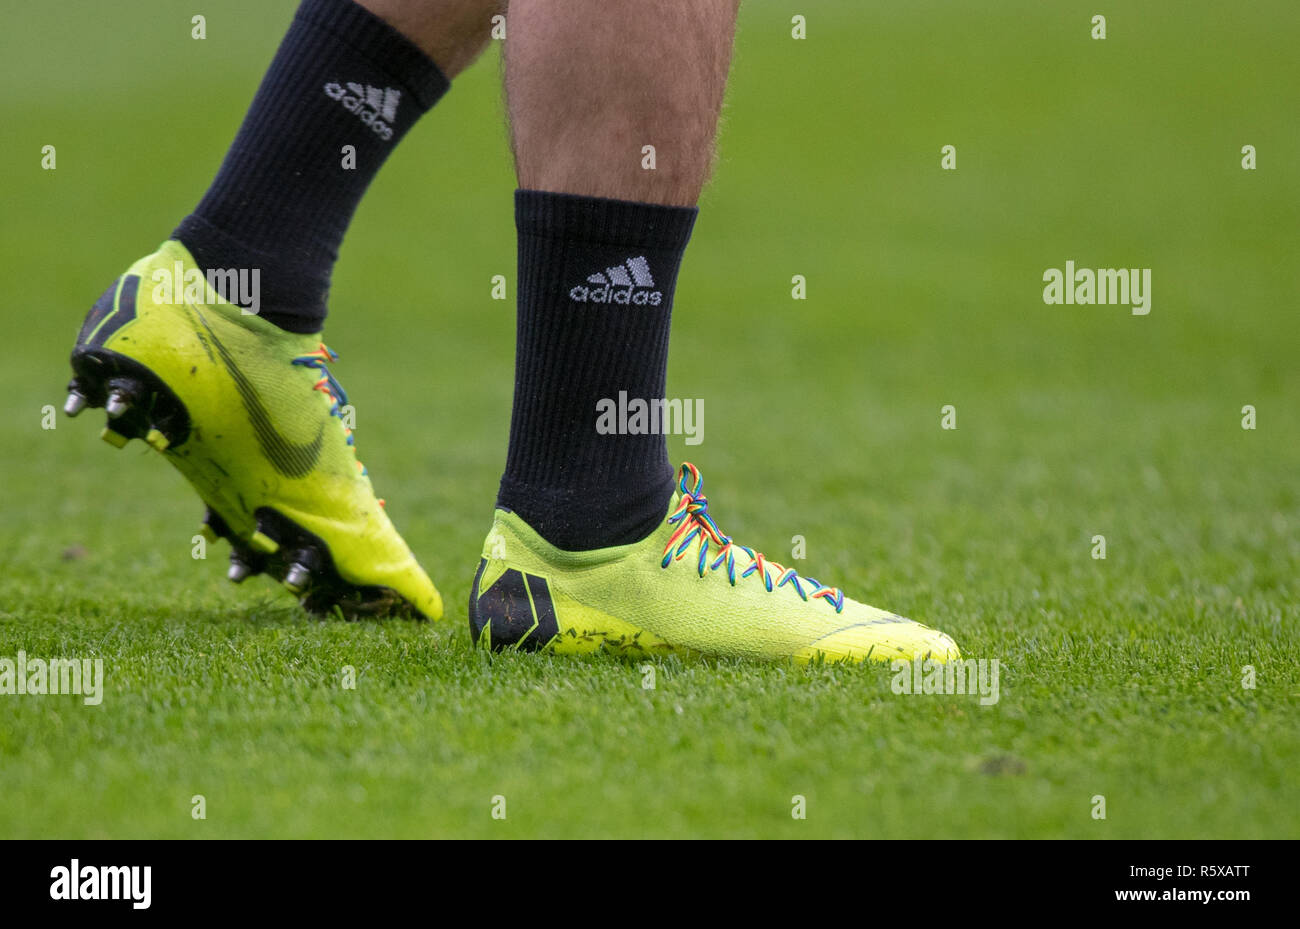 London, UK. 2nd Dec, 2018. London, UK. 2nd Dec 2018. The Nike mercurial  football boots of Joe Bryan of Fulham with rainbow laces in support of  Stonewall campaign supporting all LGBT people